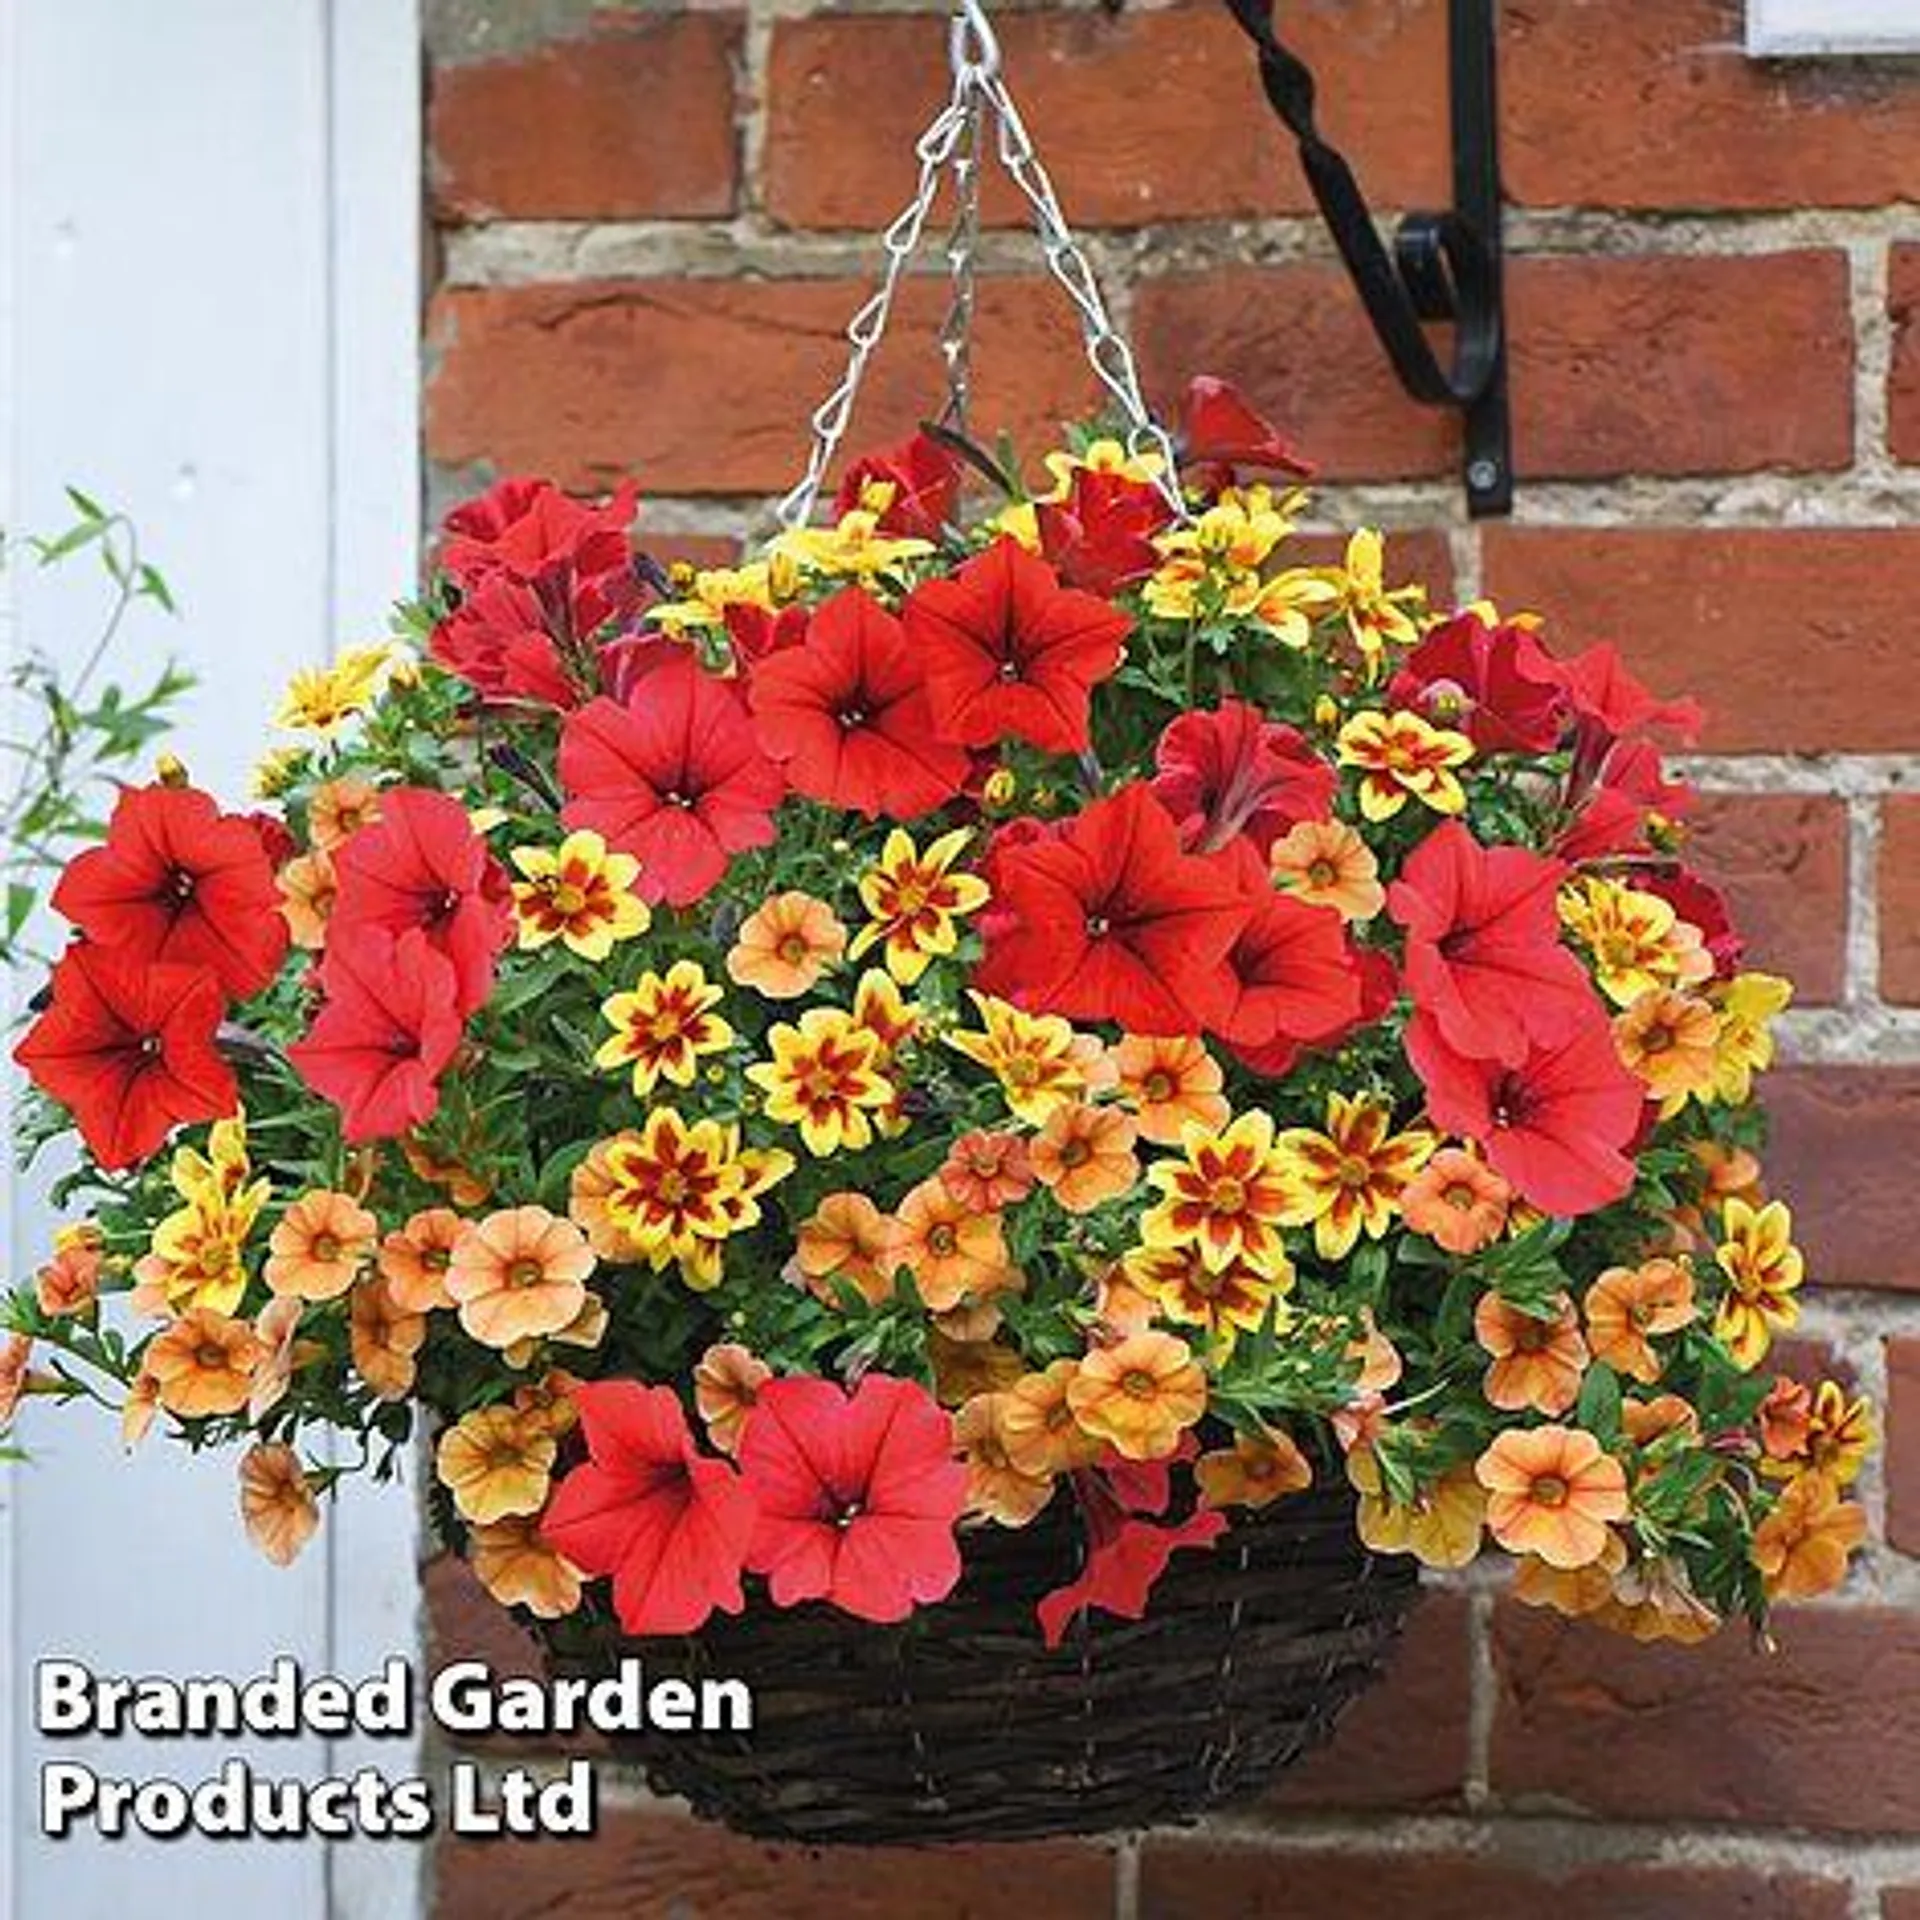 Buy two 25cm Pre-Planted Baskets ONLY £34.99